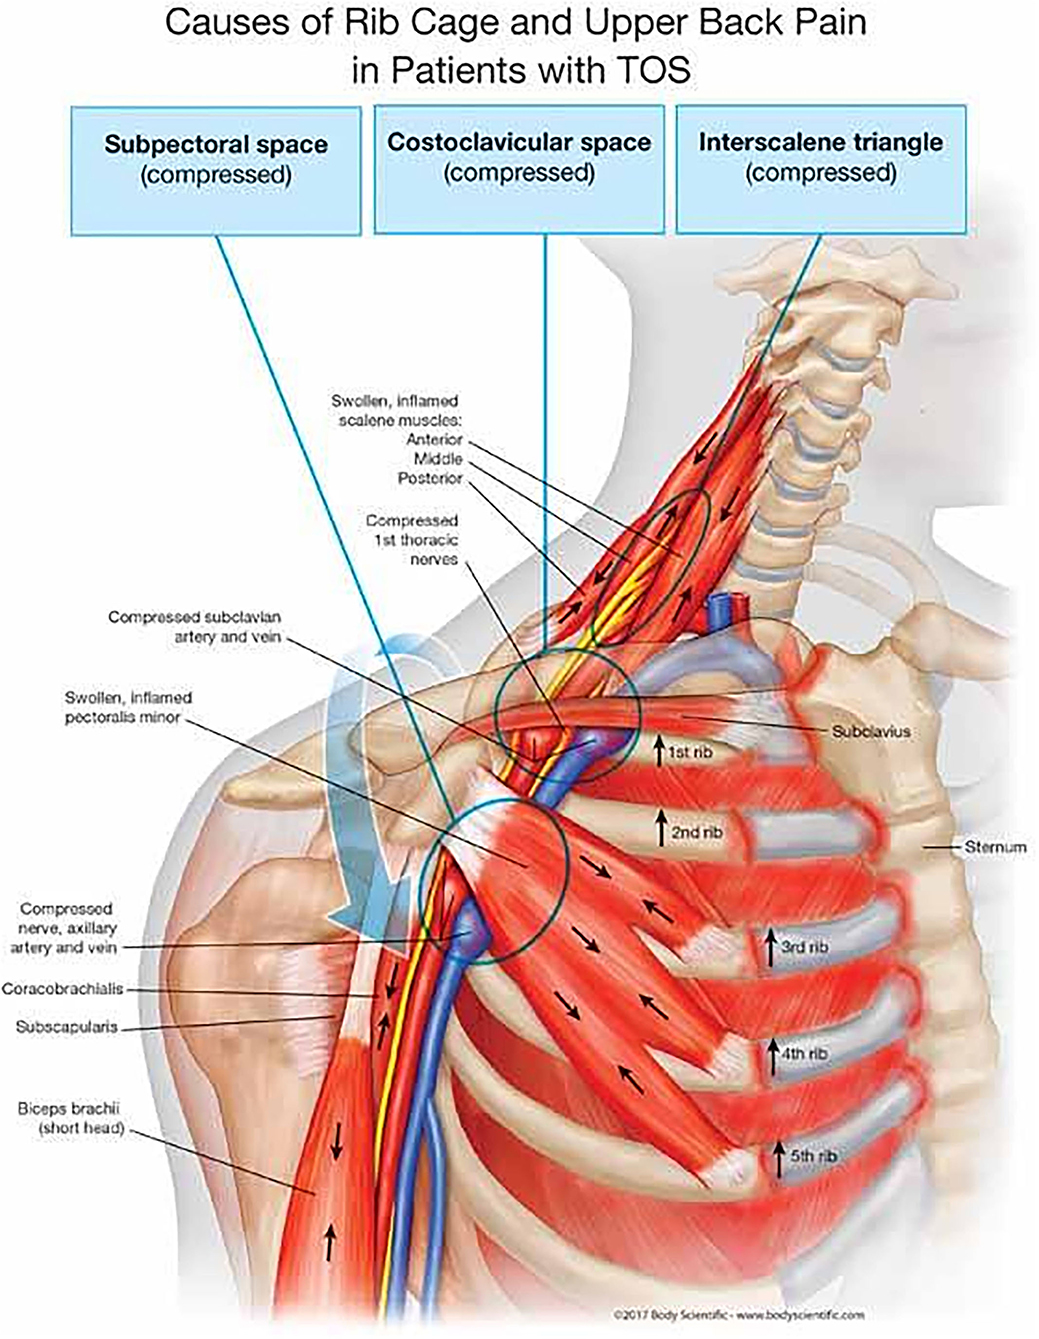 Thoracic Outlet Syndrome (TOS) - Baseline Health & Wellness